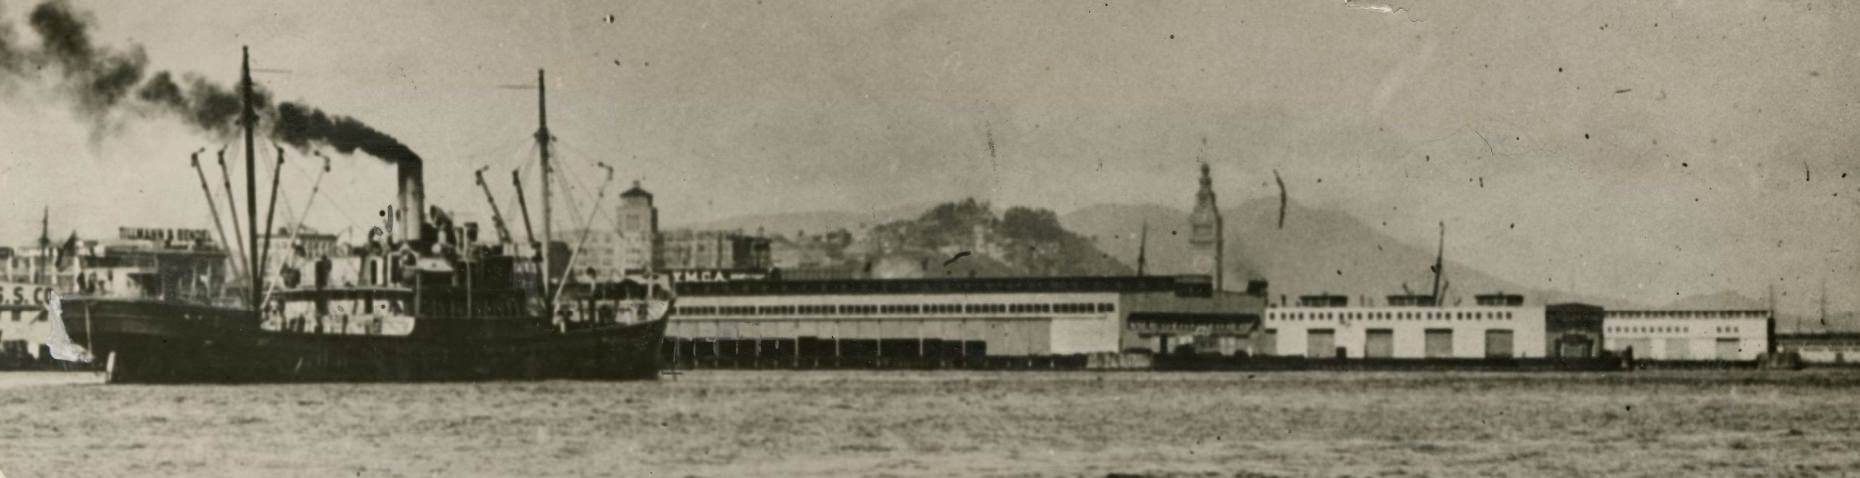 View of San Francisco waterfront from the bay in the 1910s.